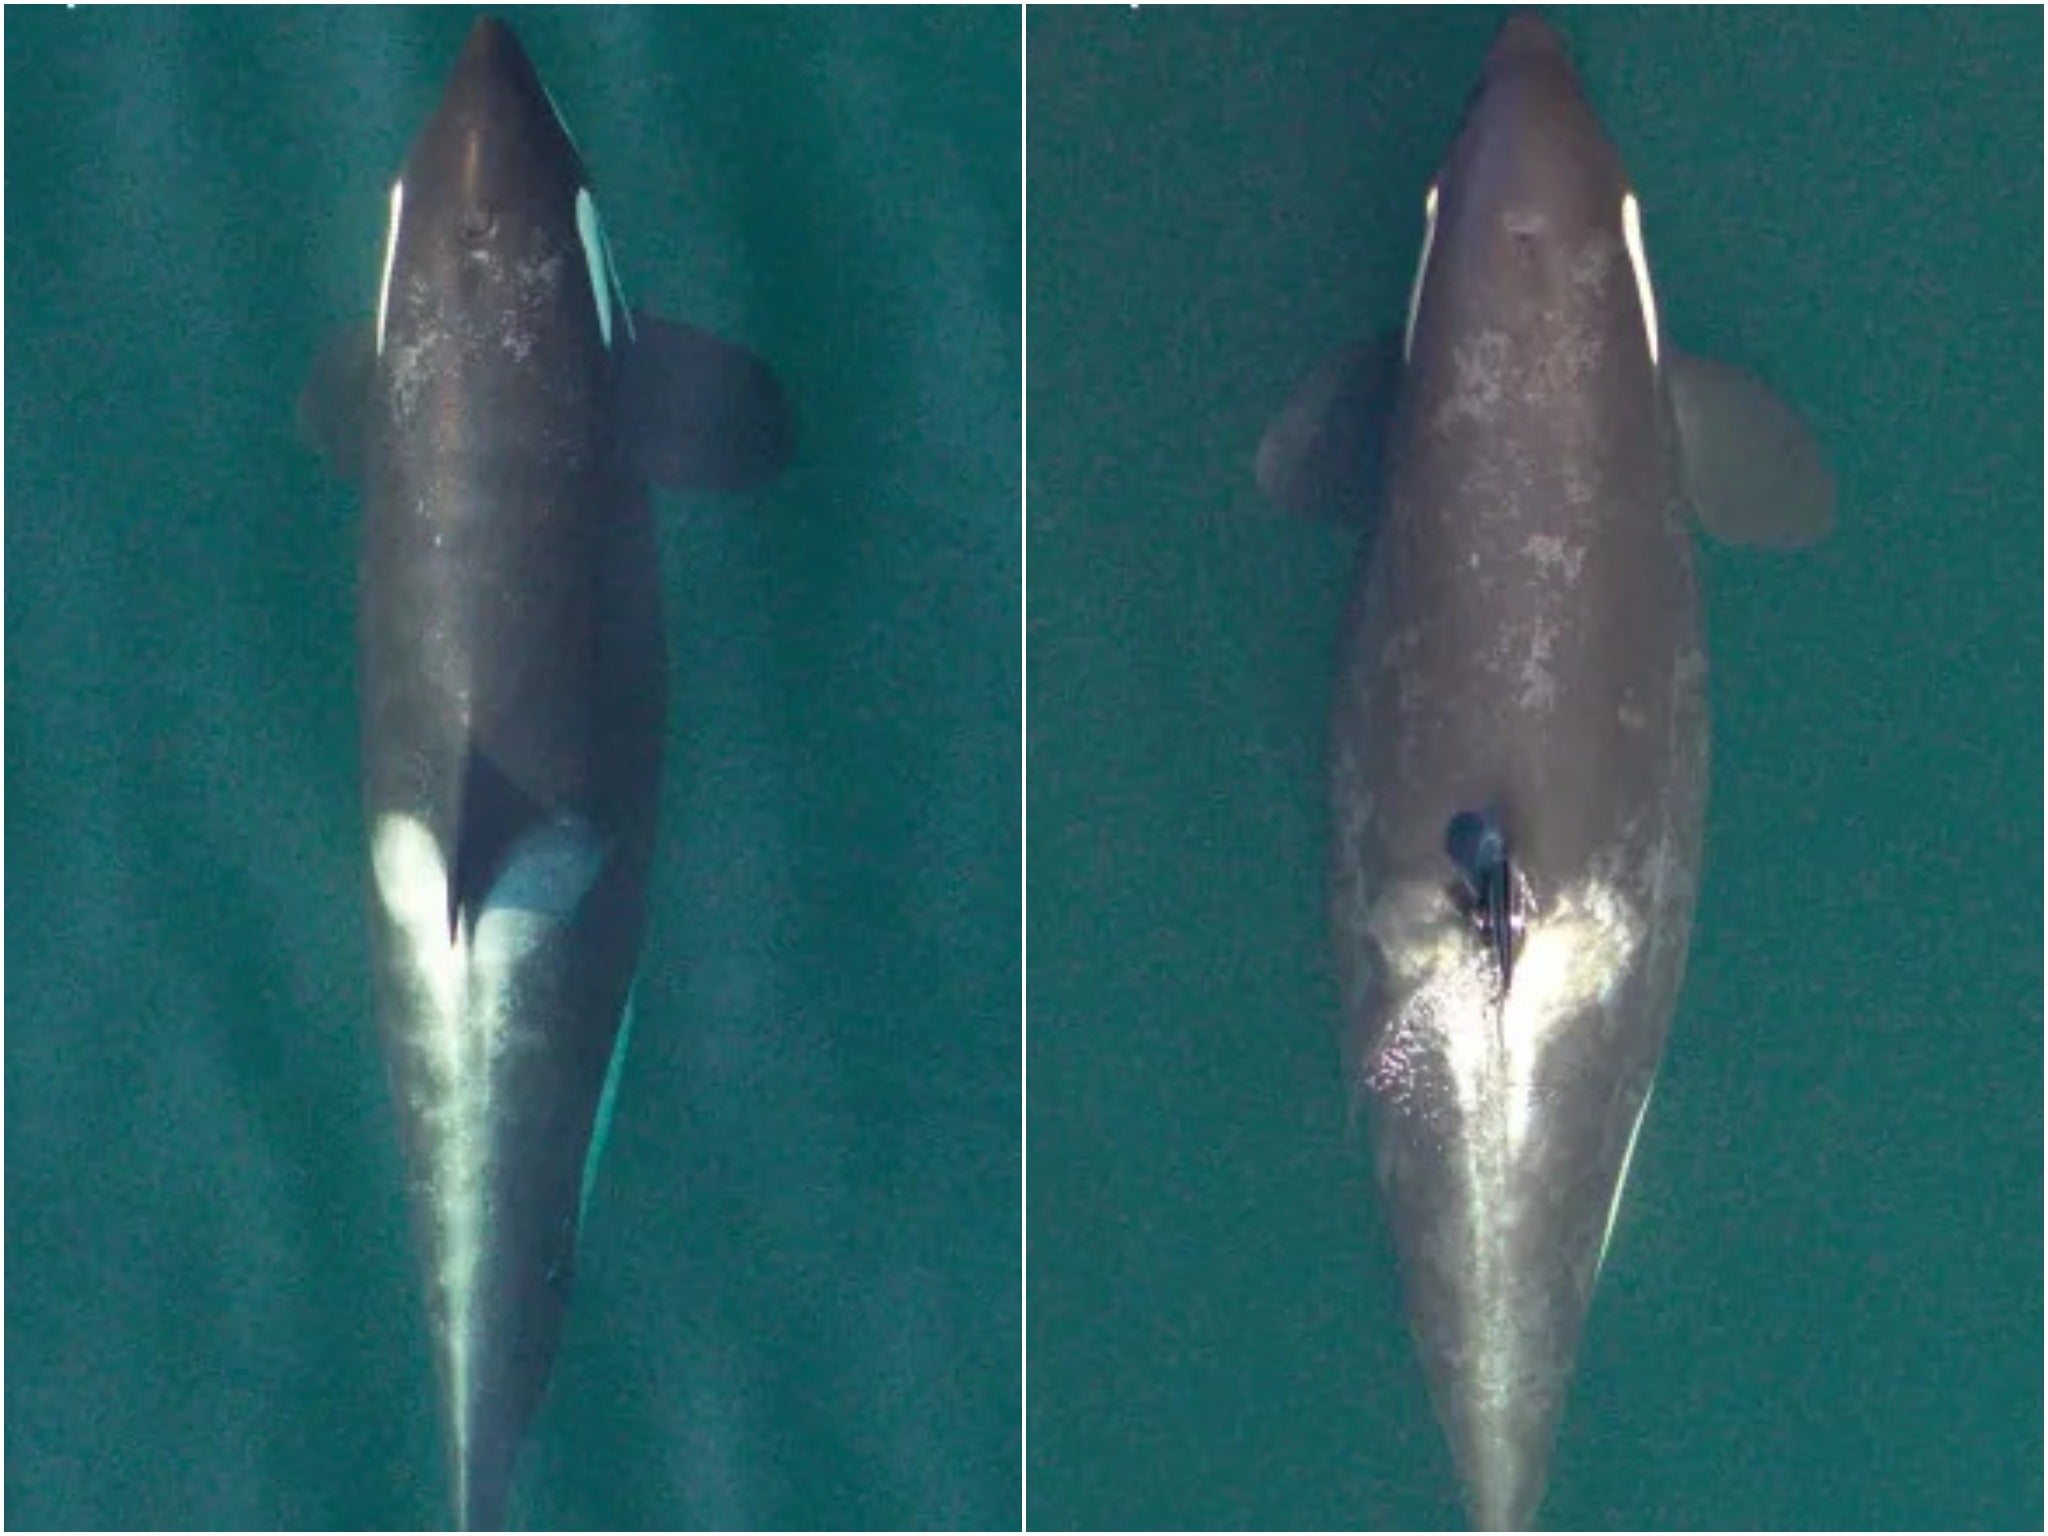 Images from research nonprofit SR3 shows that an endangered Pacific Northwest orca is pregnant